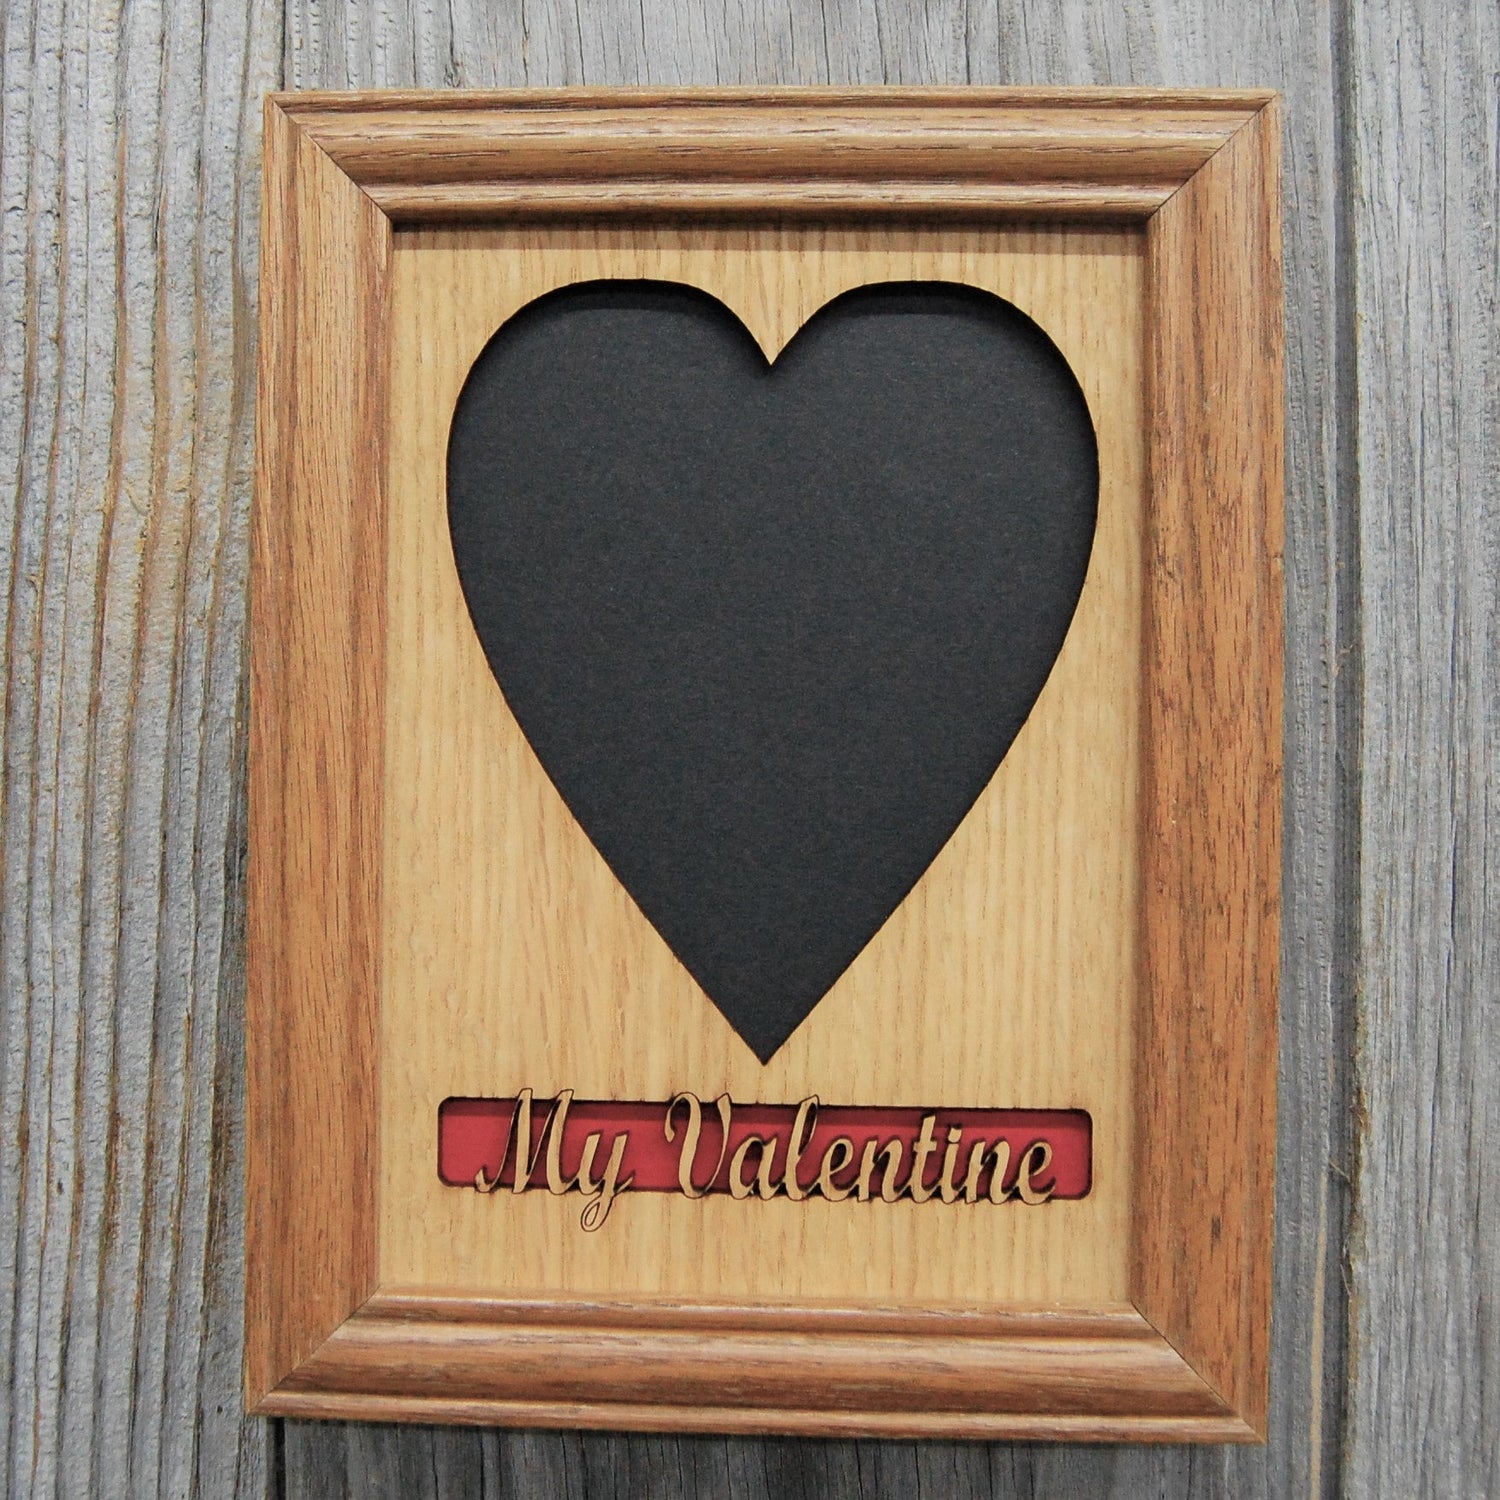 My Valentines Picture Frame - 5x7 Frame Holds 1 or 2 Photos - Legacy Images - Picture Frames